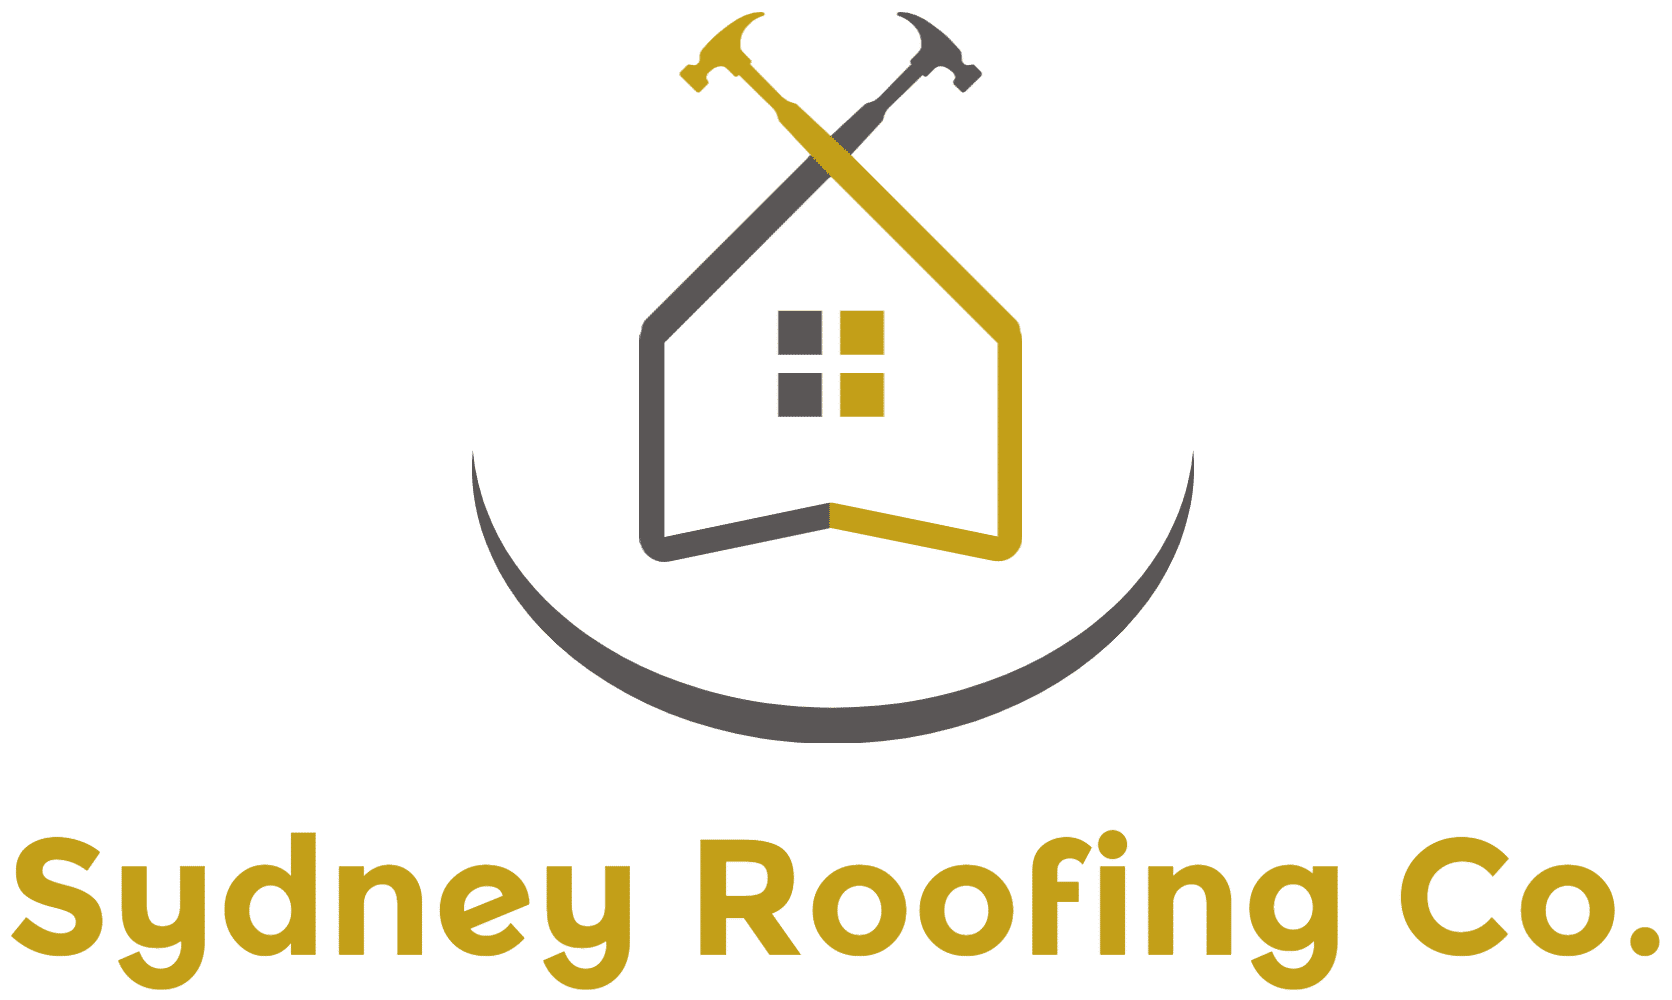 Sydney Roofing